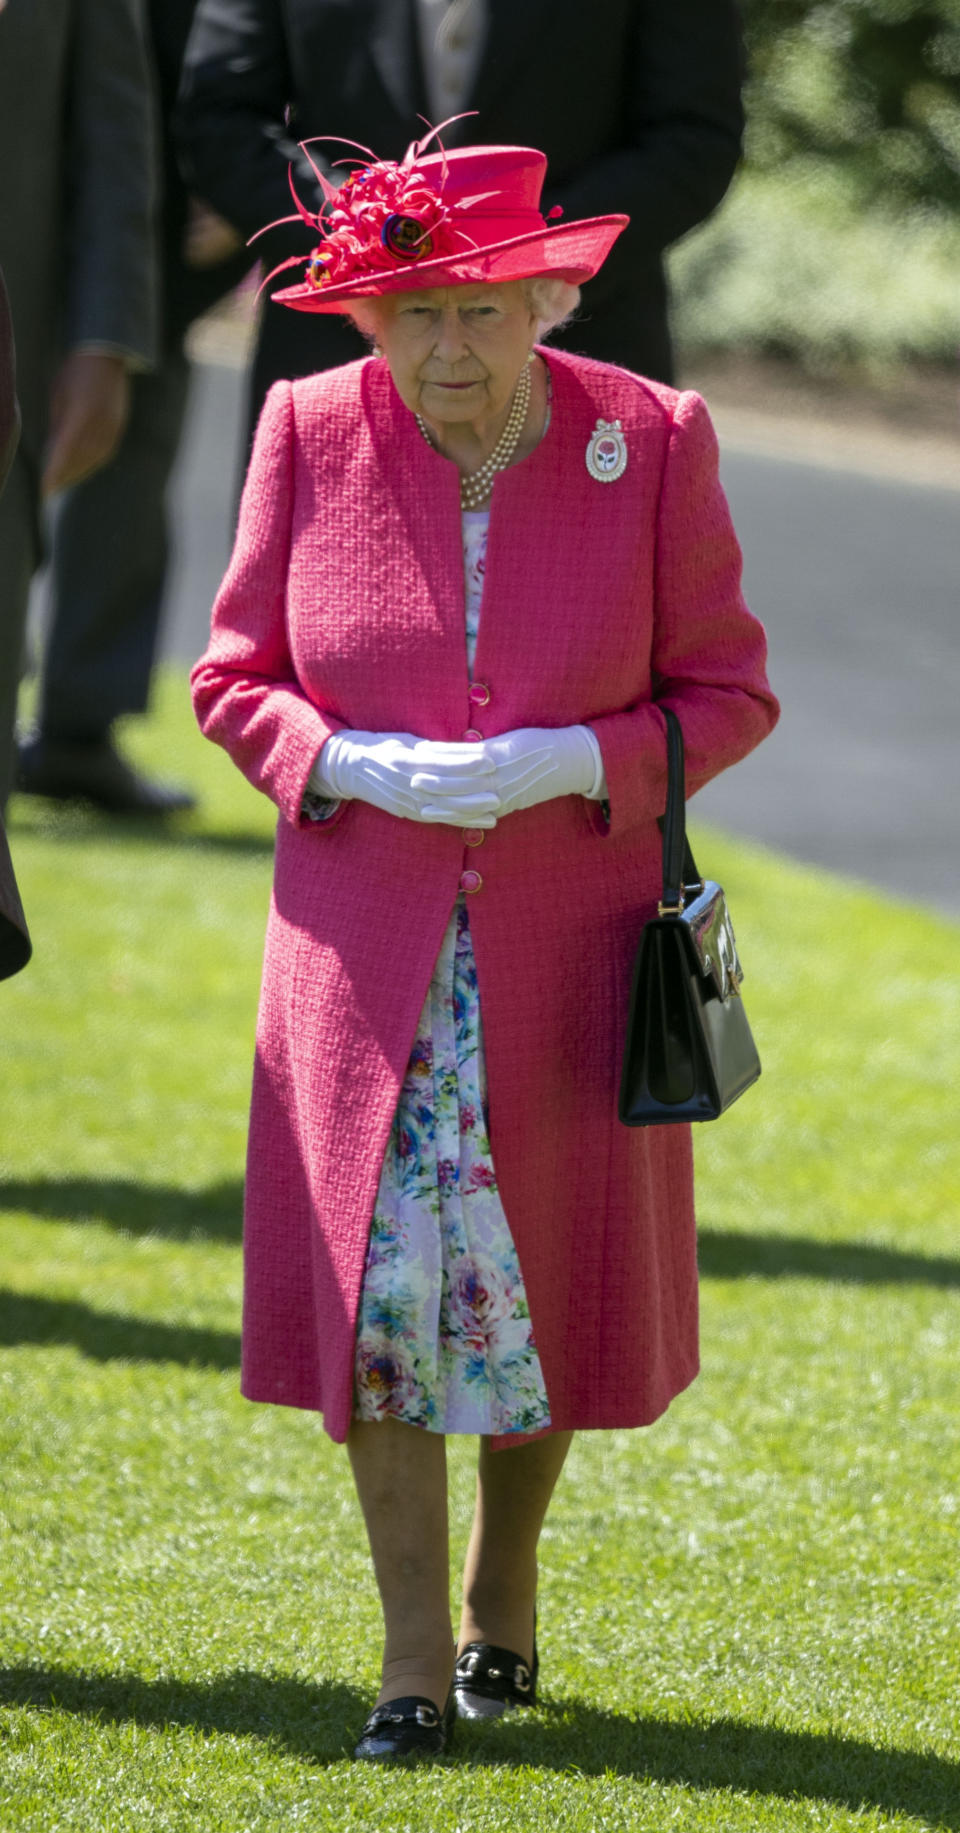 The Queen on day 3 of Royal Ascot